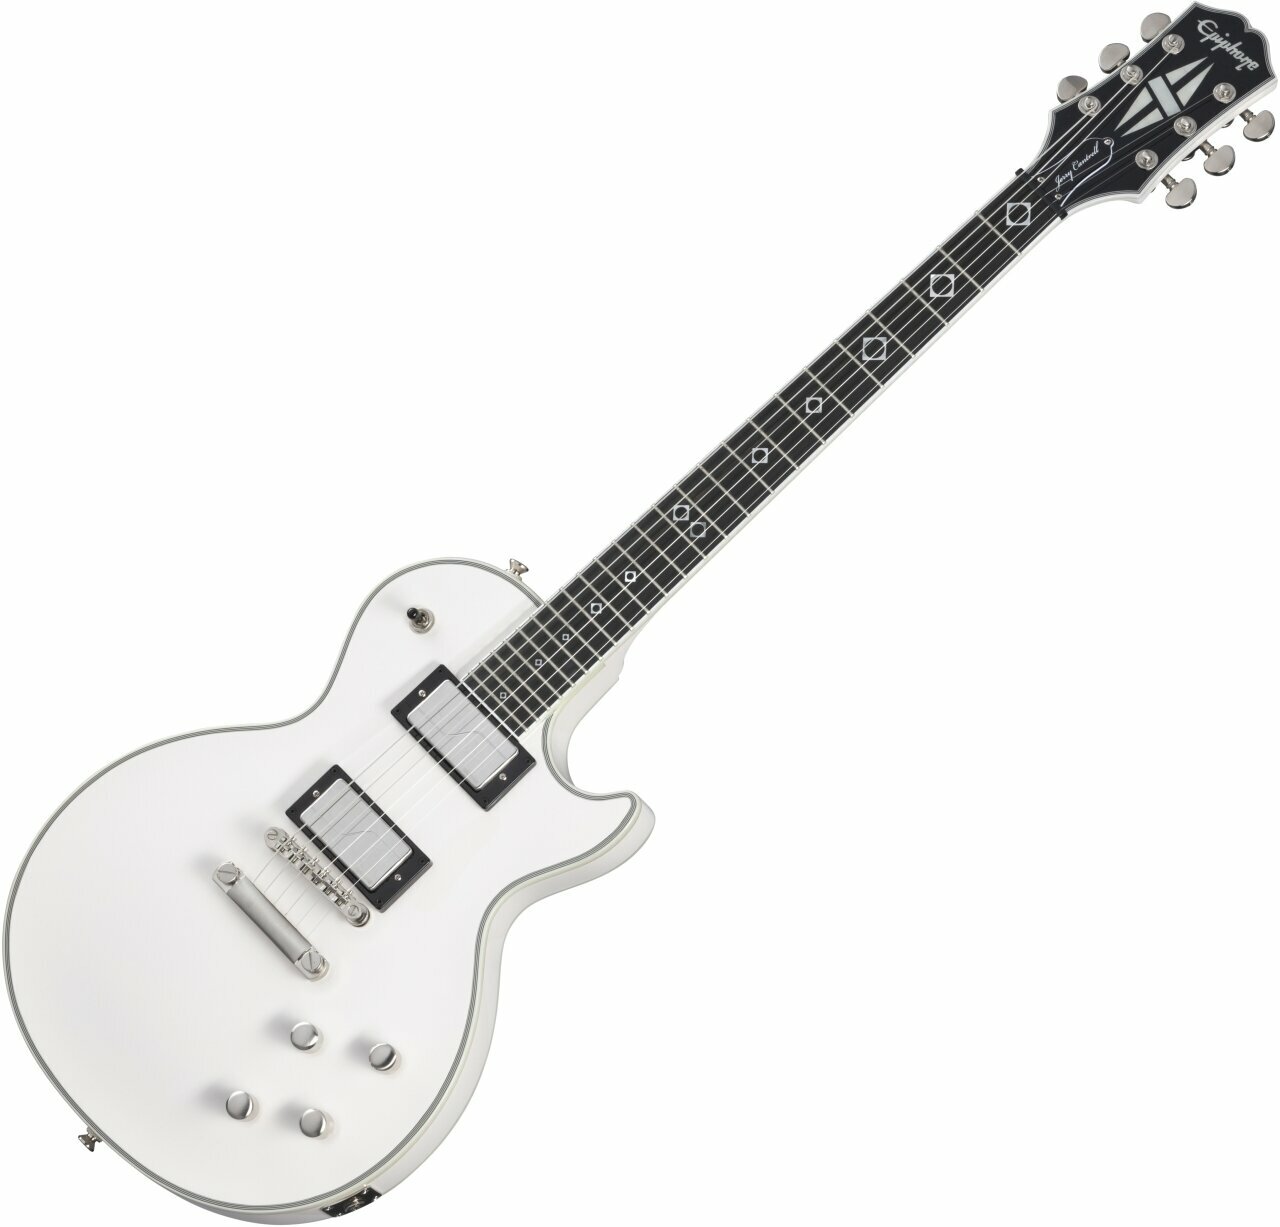 Electric guitar Epiphone Jerry Cantrell Prophecy Les Paul Custom Bone White